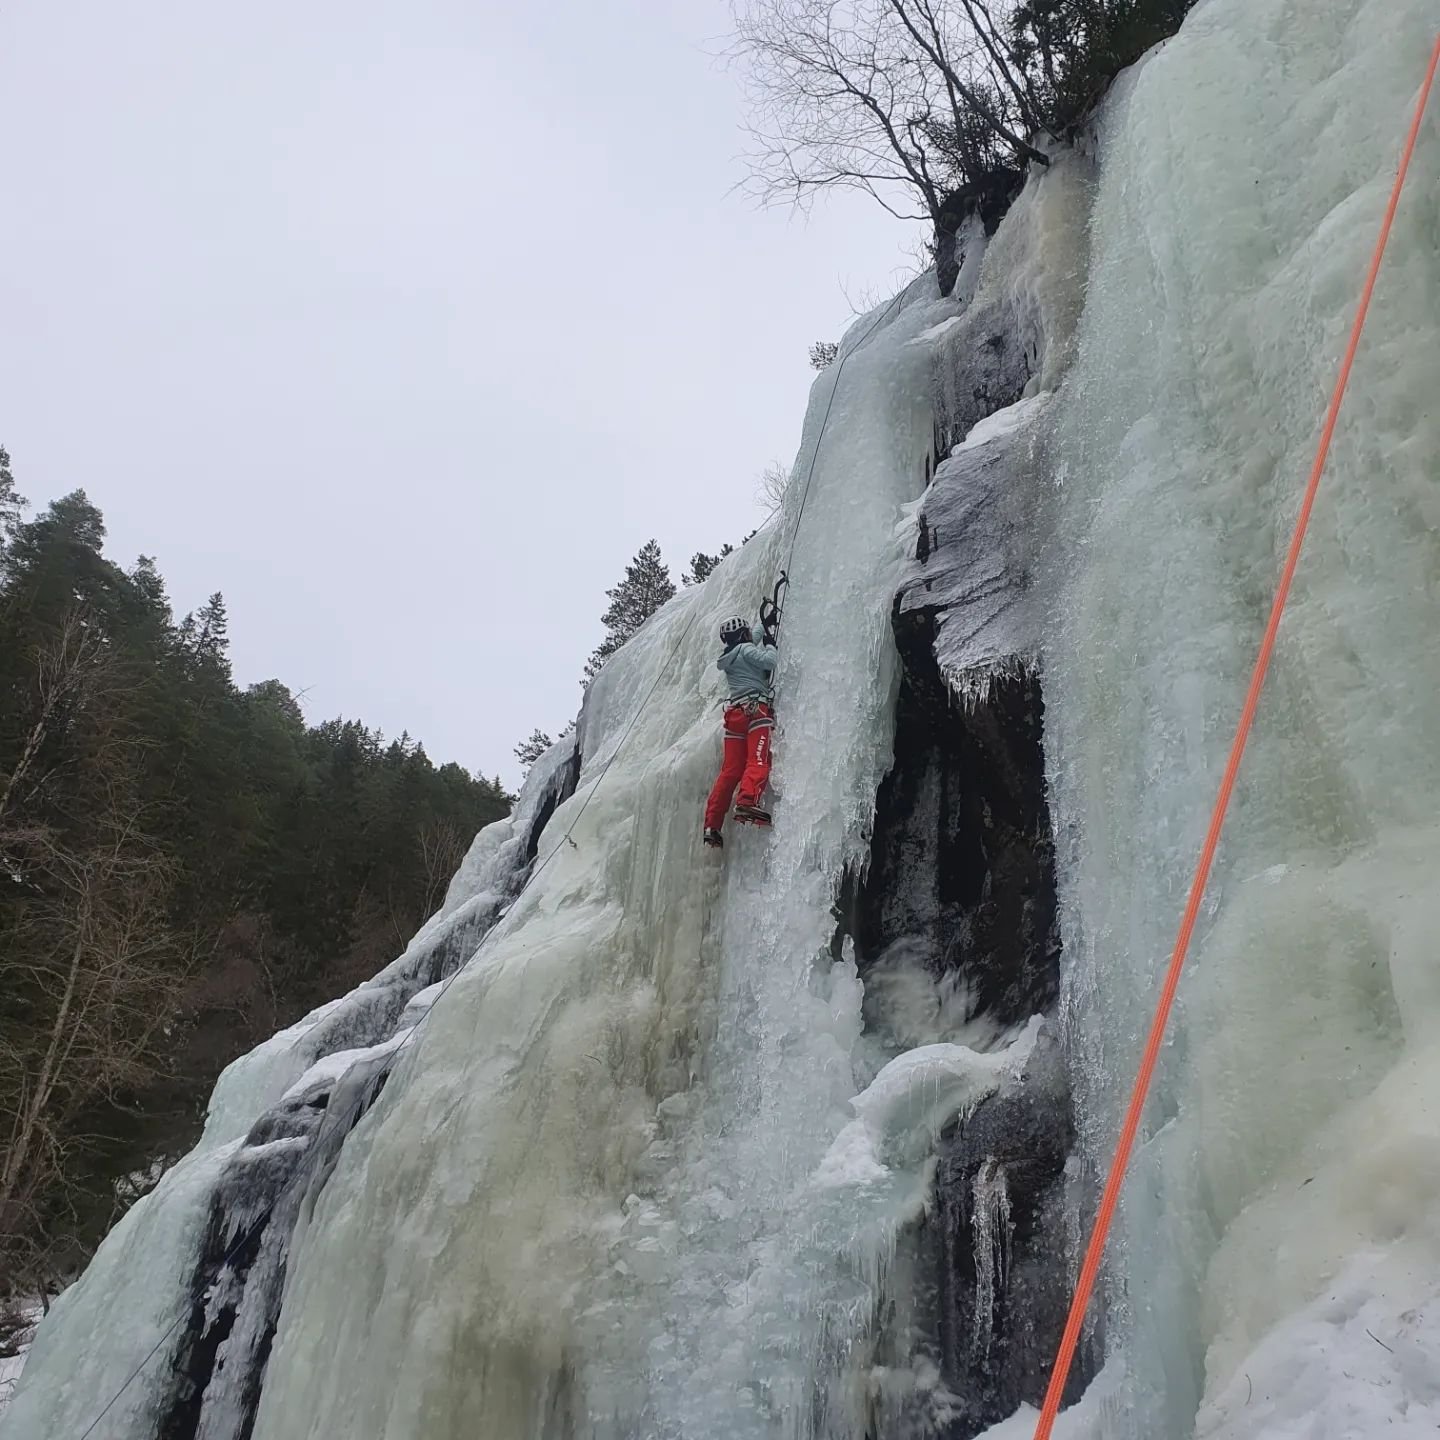 A great first 2 days climbing in #rjukan. 
Warming up on day 1 at #ozzimosis then a mega day 2 on the aptly named 'Marathon' 800m of vertical accent! 

#iceclimbing
#winterclimbing
#norway
#norwayiceclimbing
#winteradventure
#winteradventures